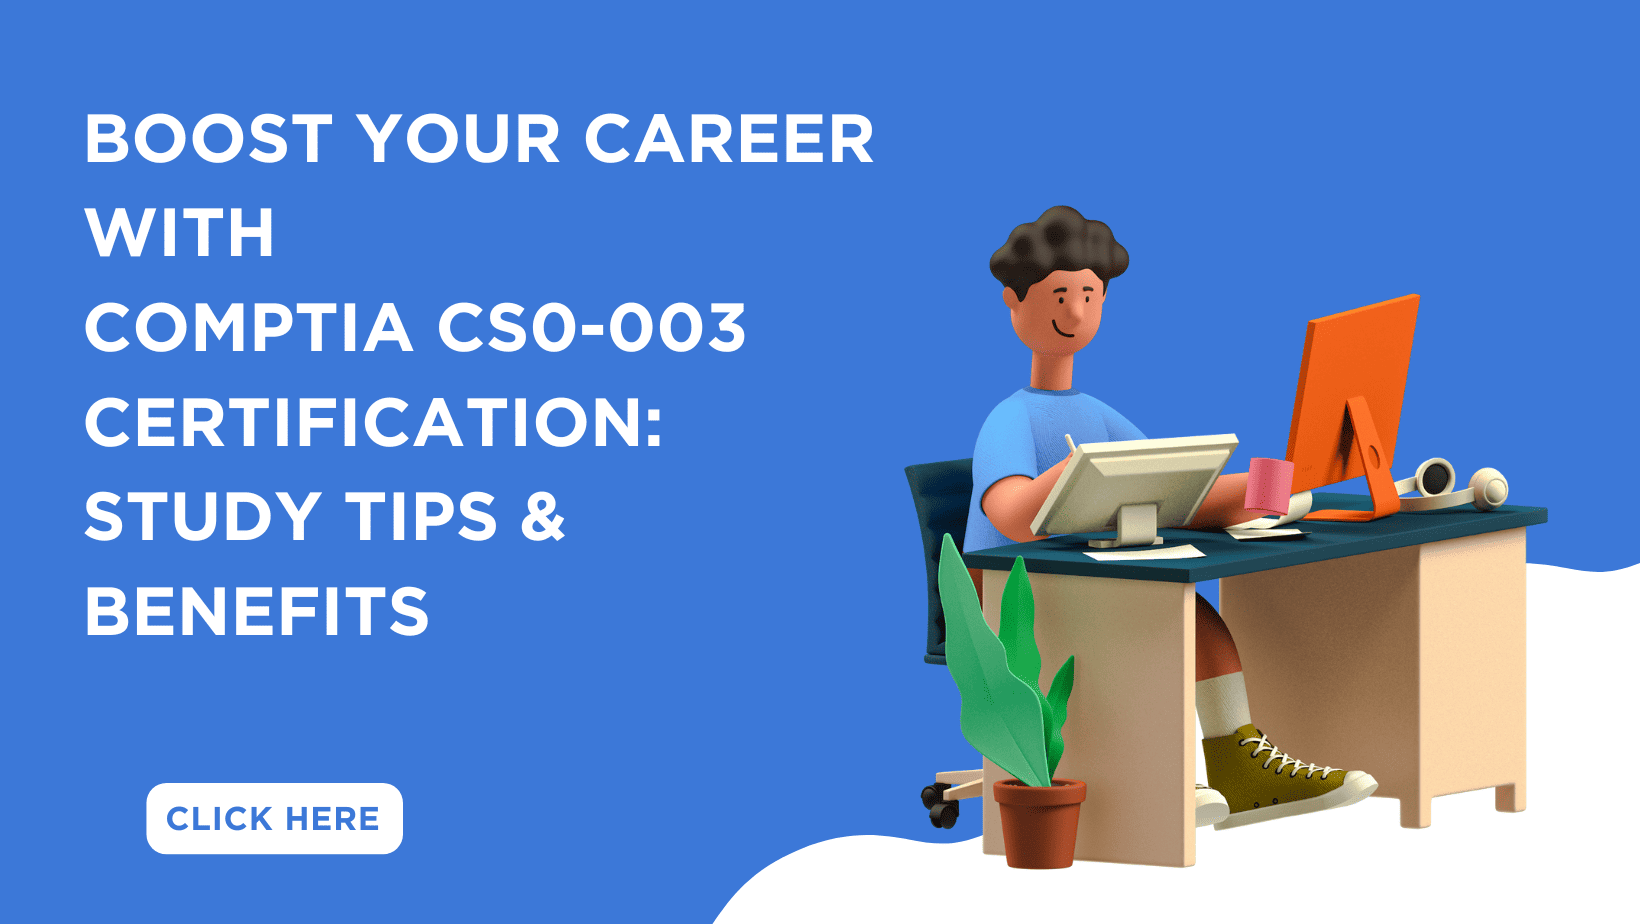 Ace the CompTIA CS0-003 CySA+ exam with expert study tips & practice tests. Boost your IT career with valuable certification benefits!